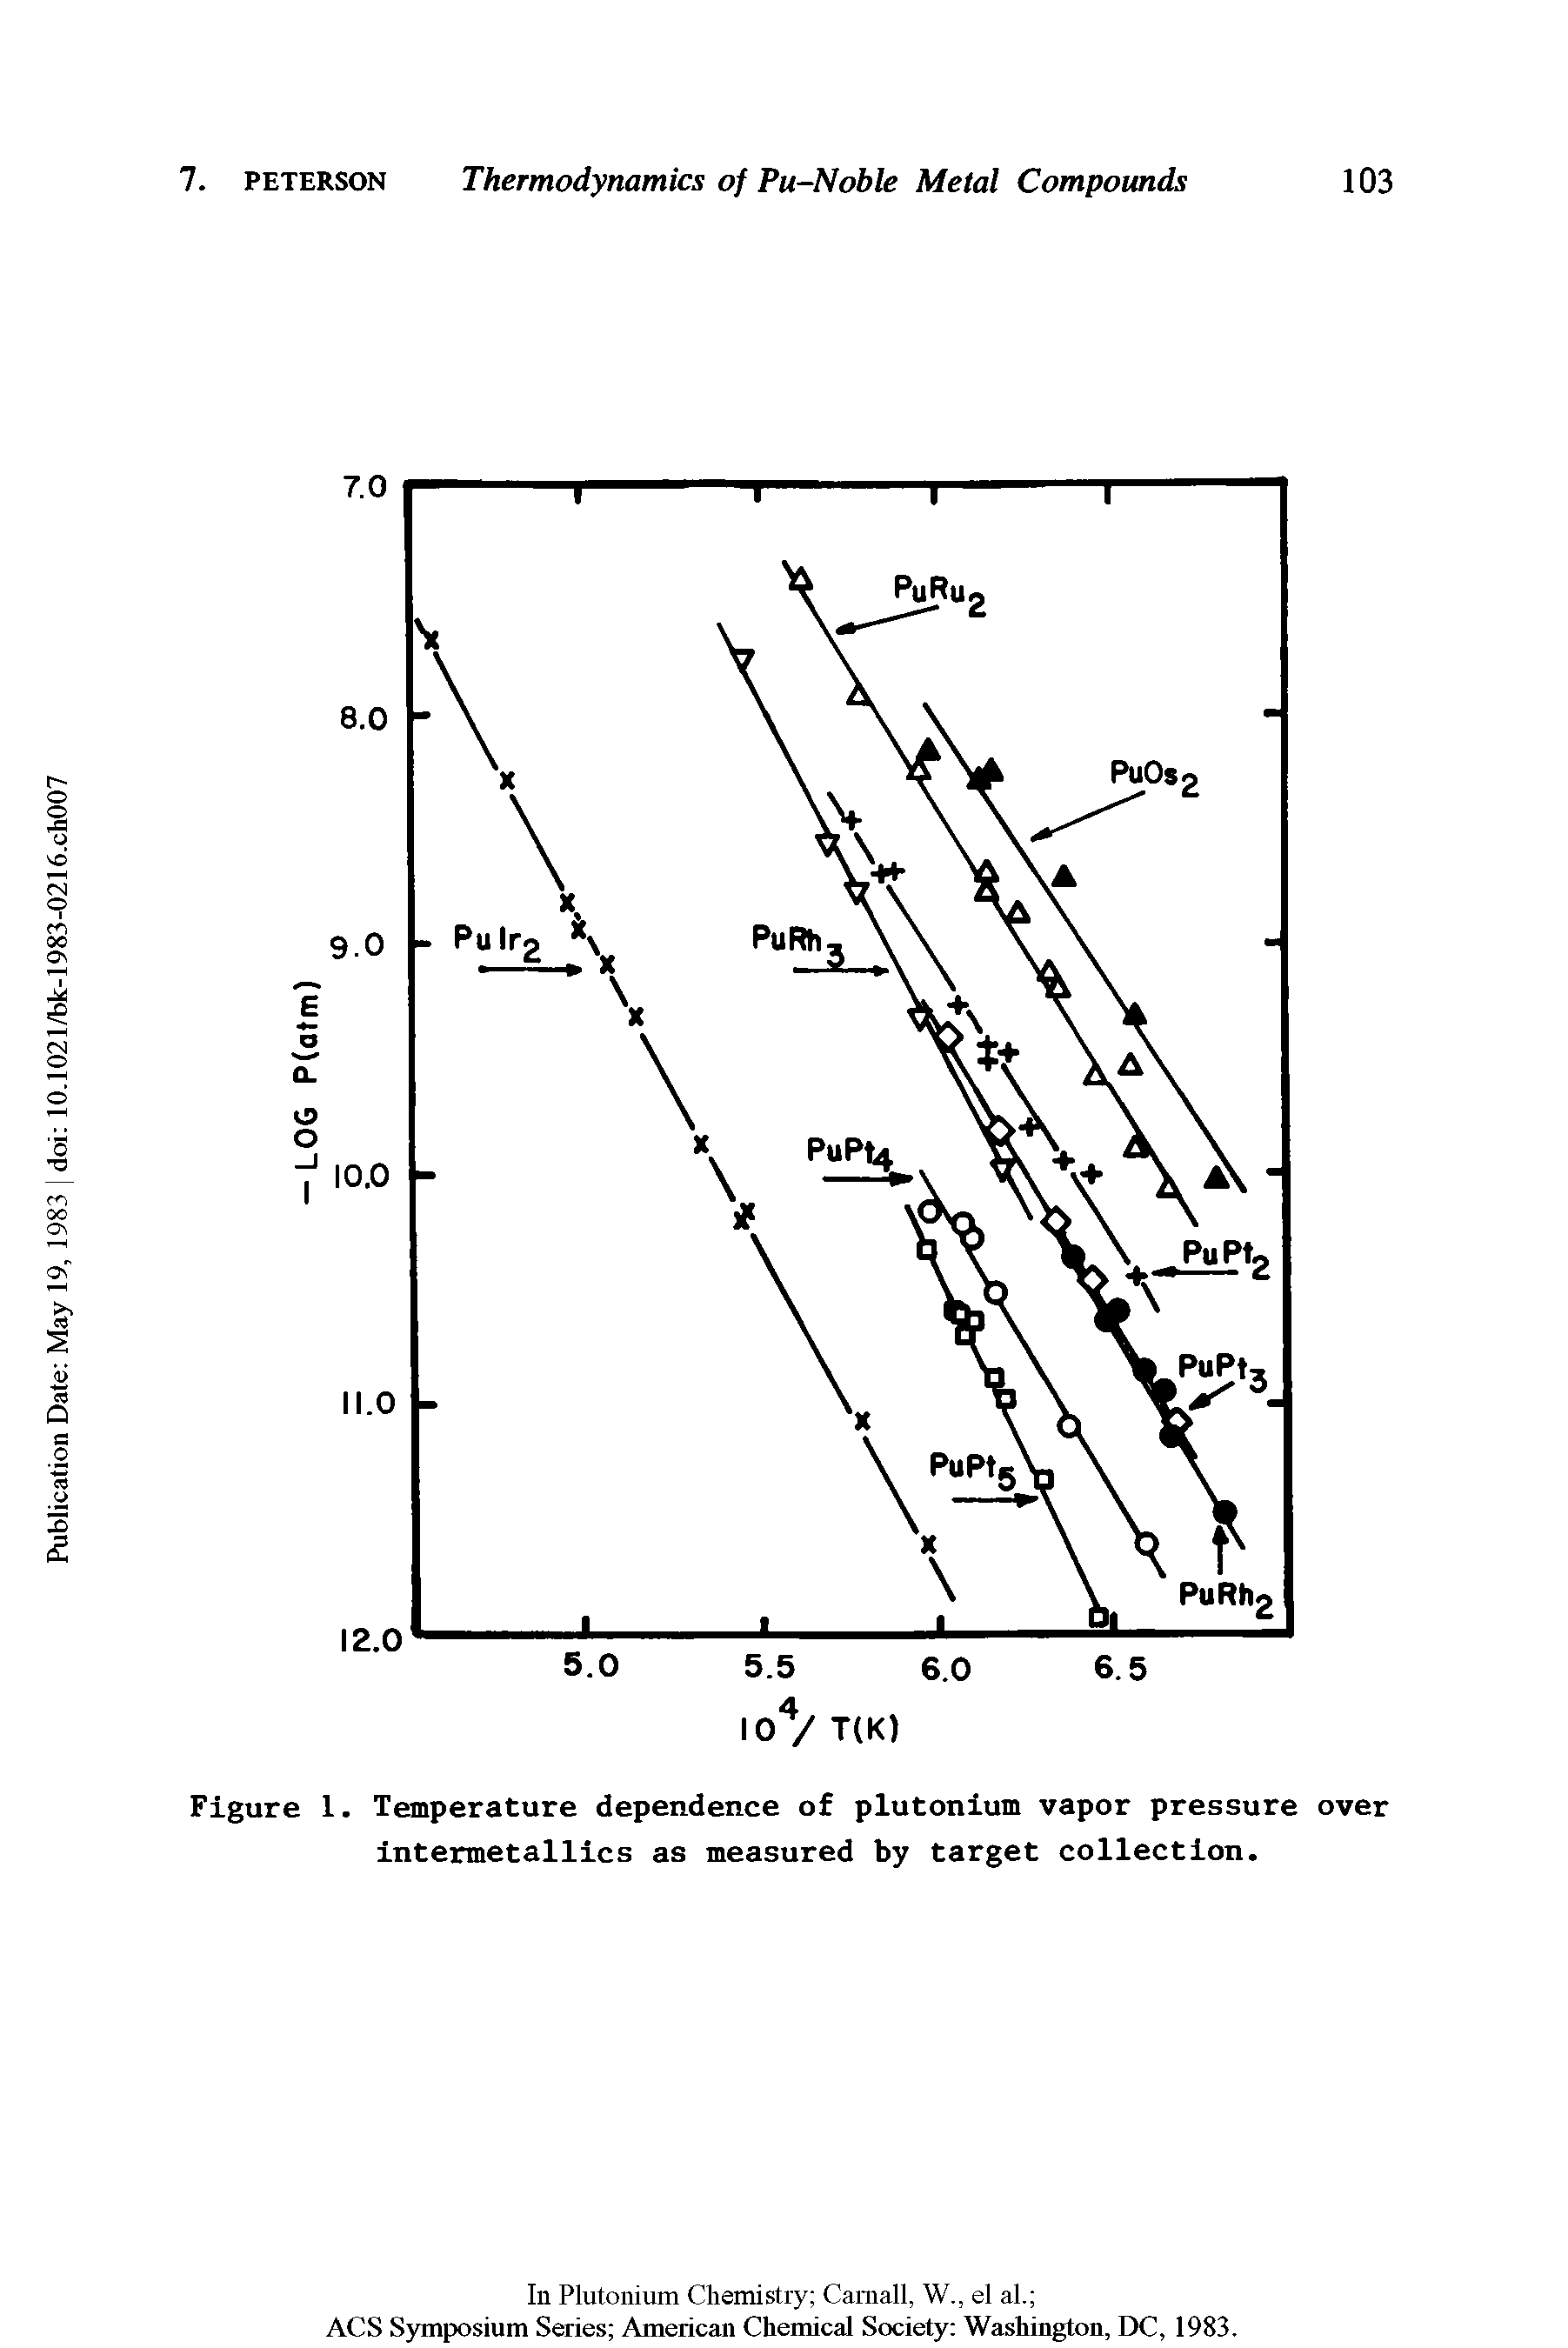 Figure 1. Temperature dependence of plutonium vapor pressure over intermetallics as measured by target collection.